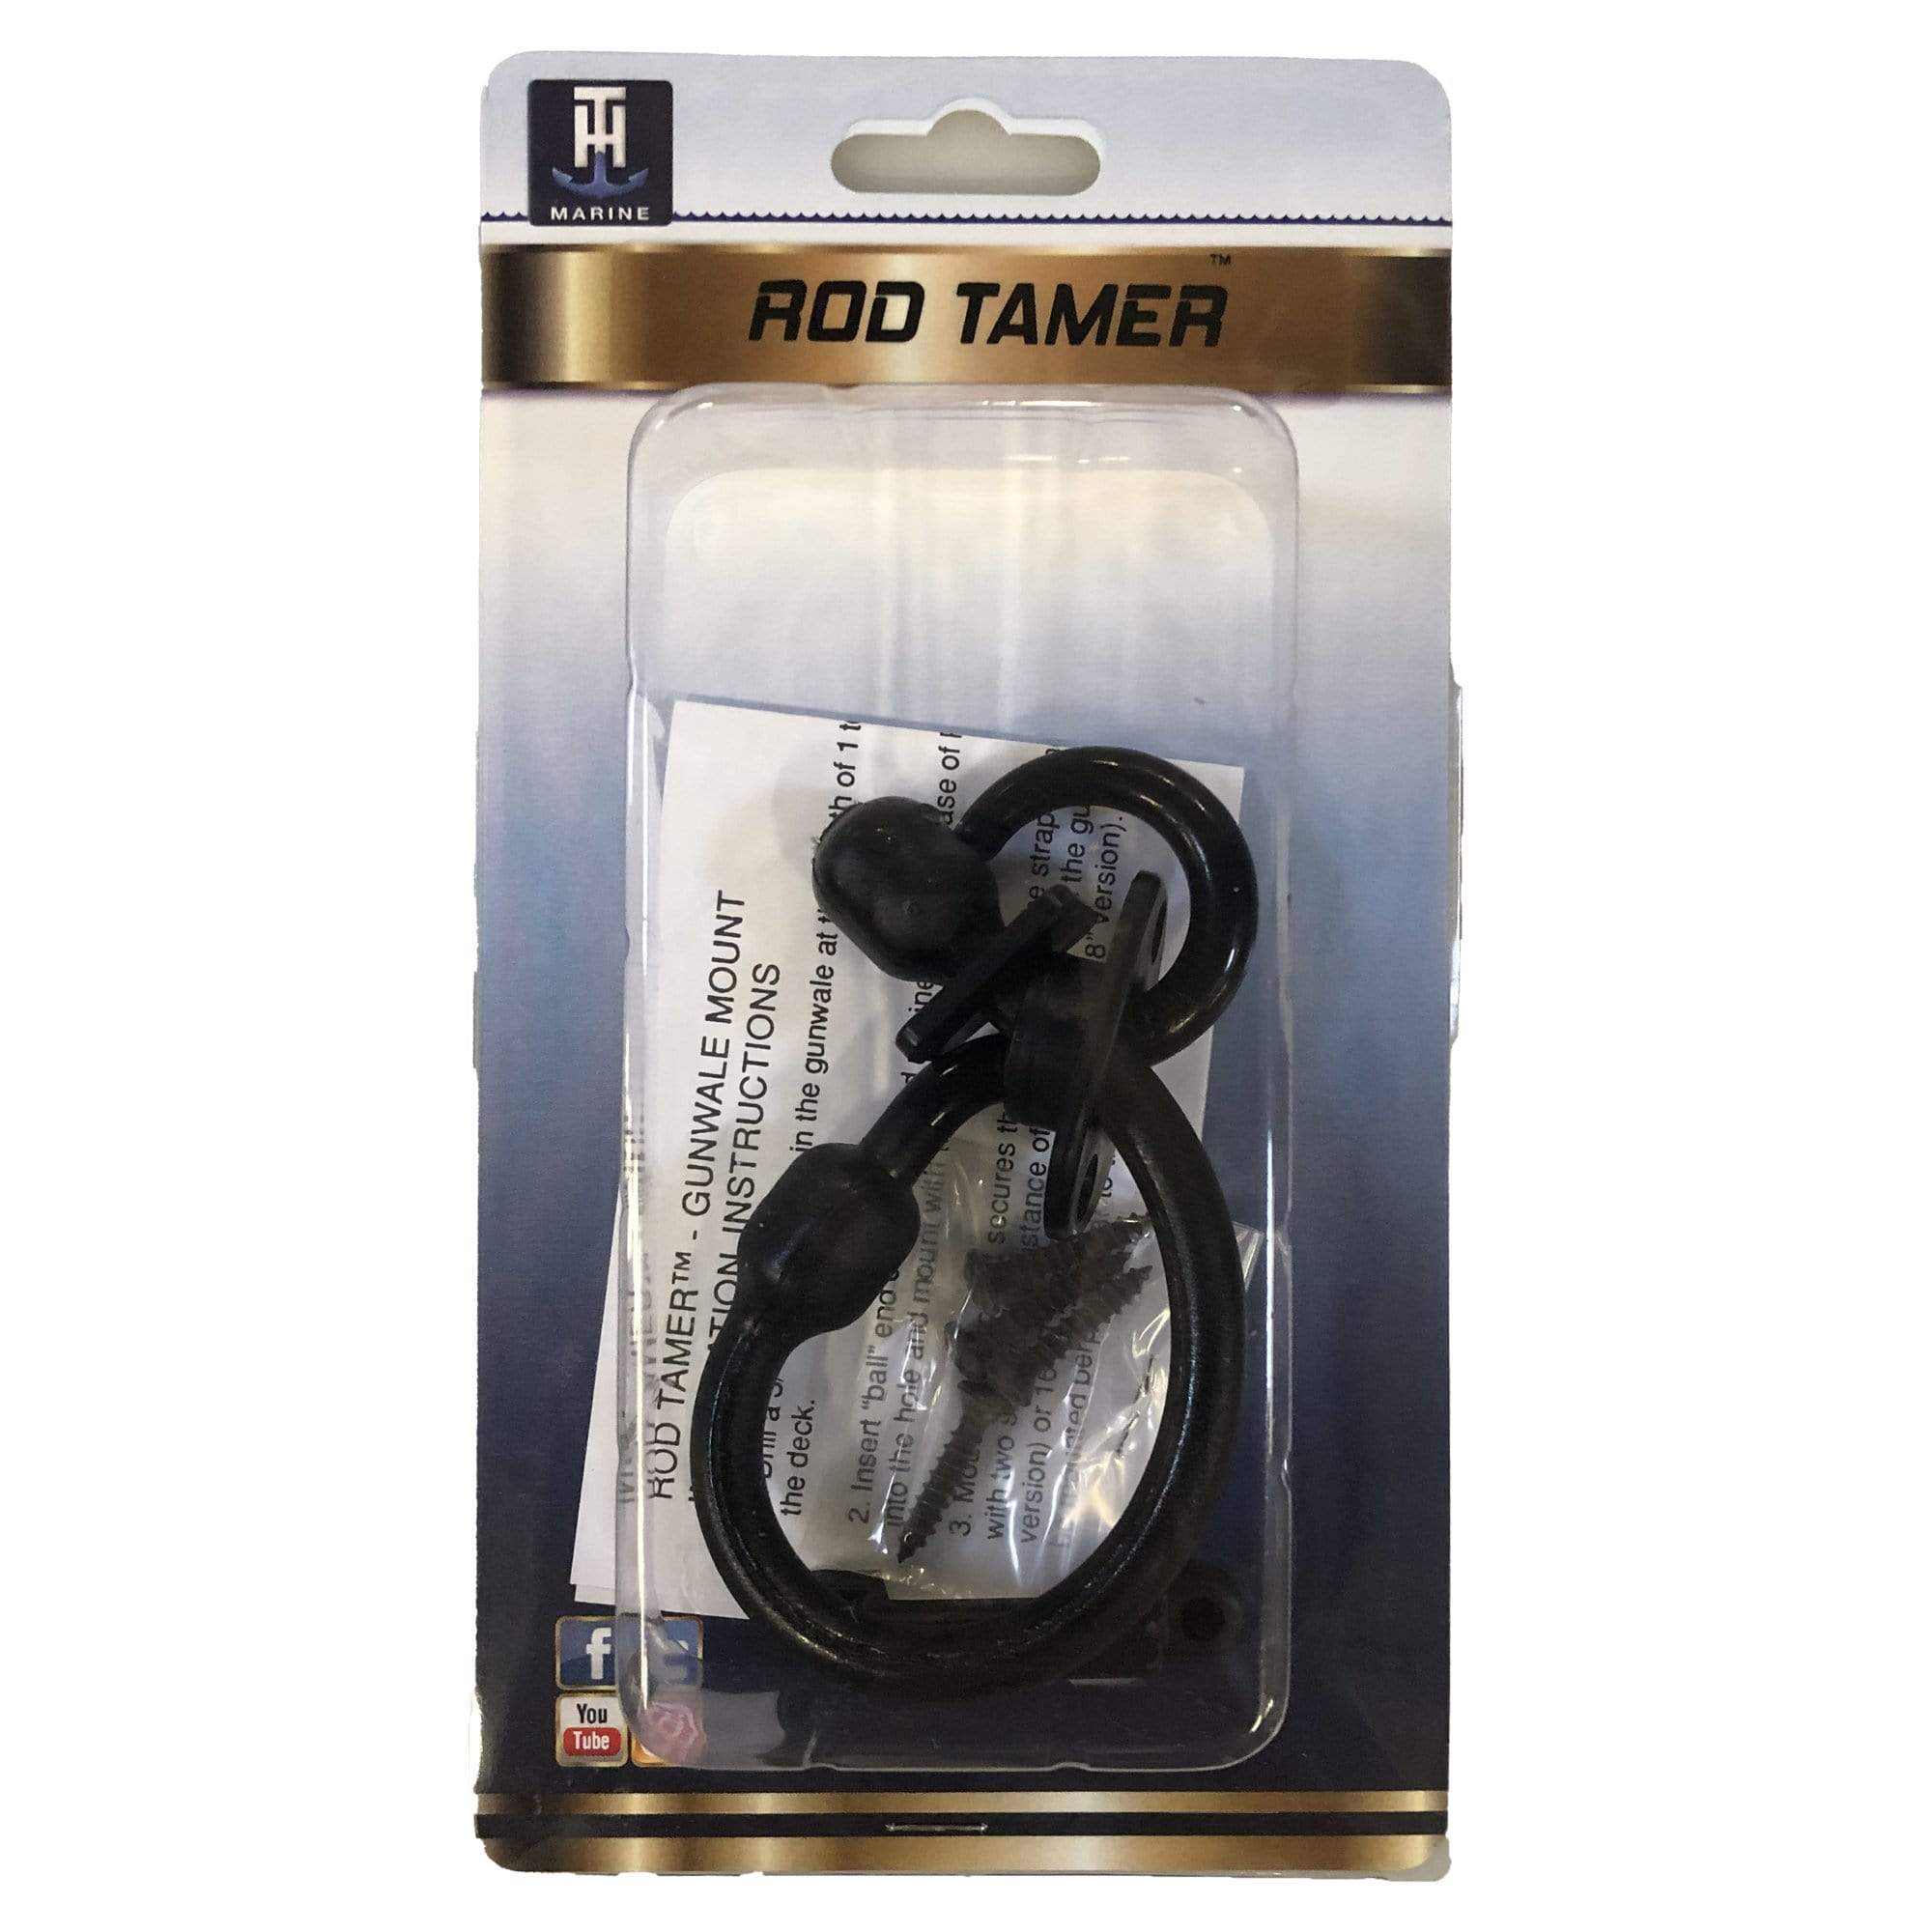 Etereauty Fishing Rod Boat Mount Tamer Holder Deck Replacement